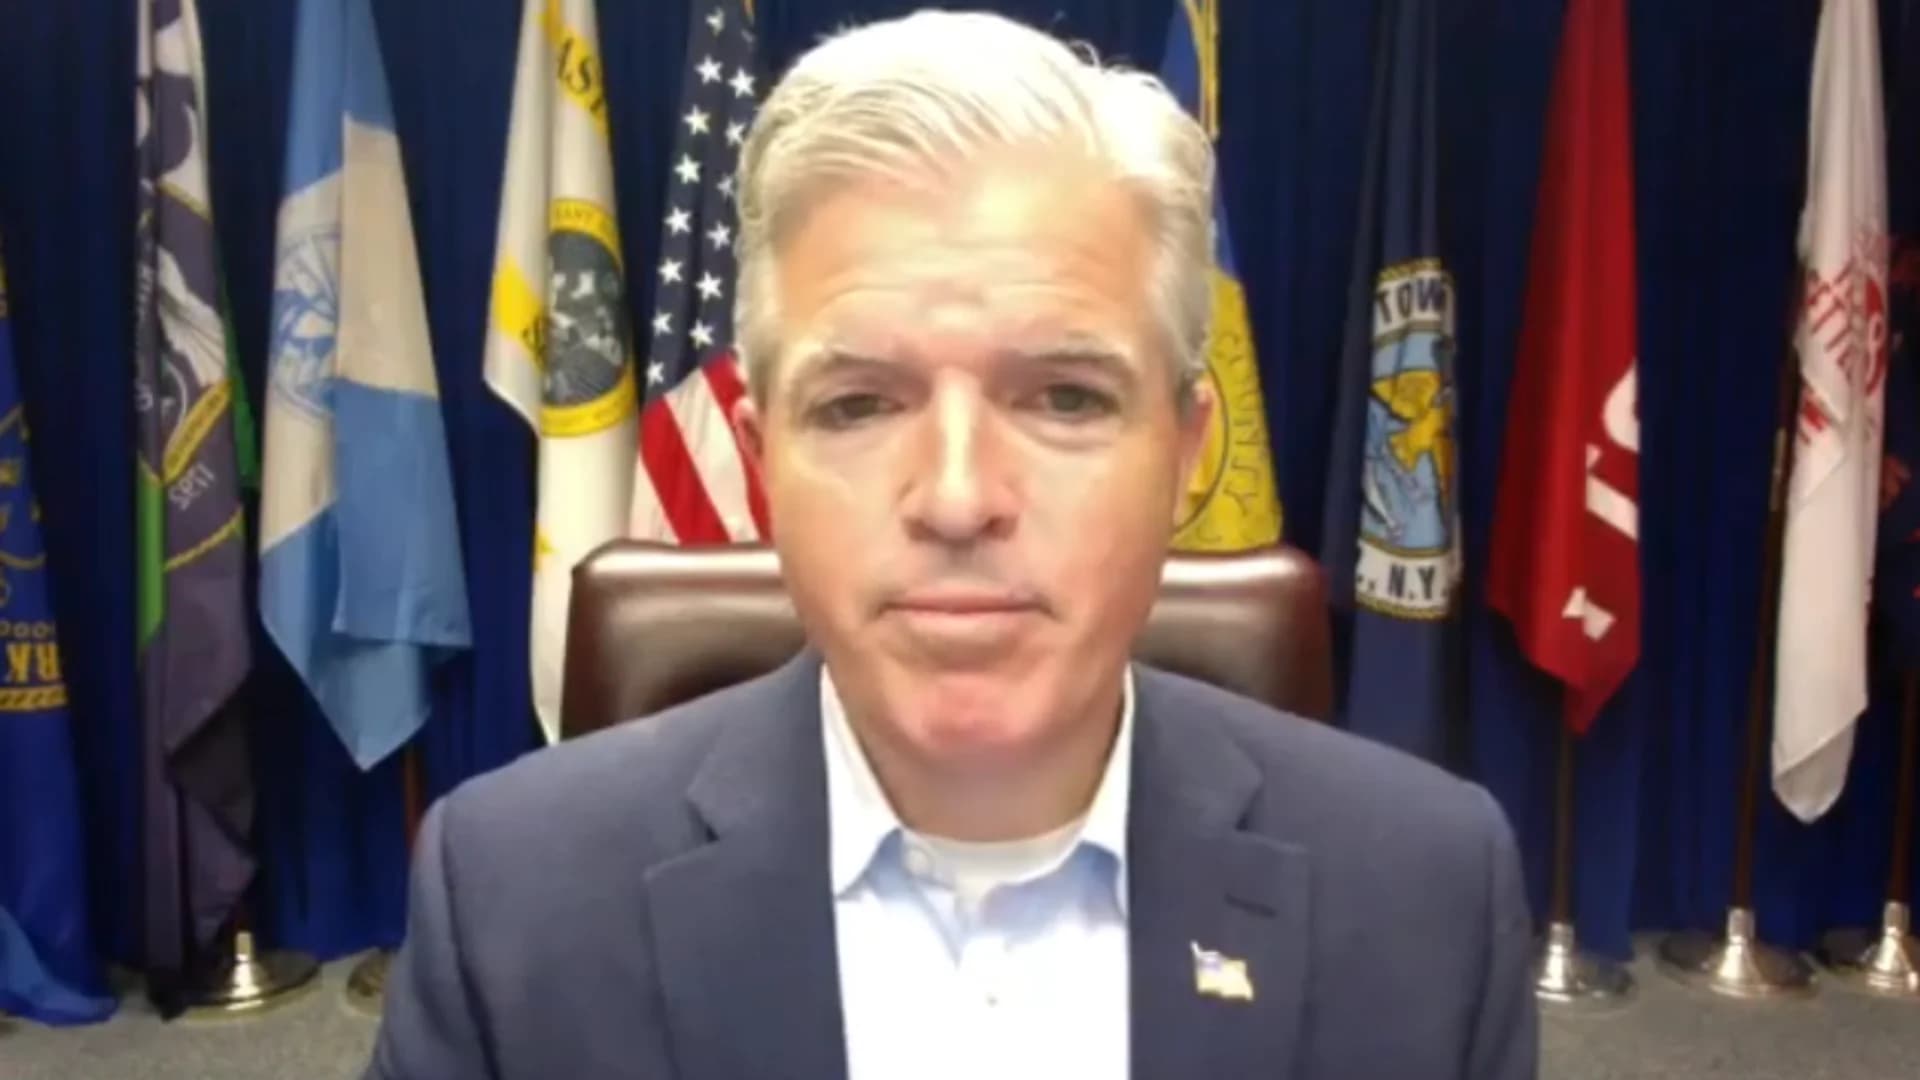 Suffolk County Executive Steve Bellone is giving an update on the aftermath of Isaias